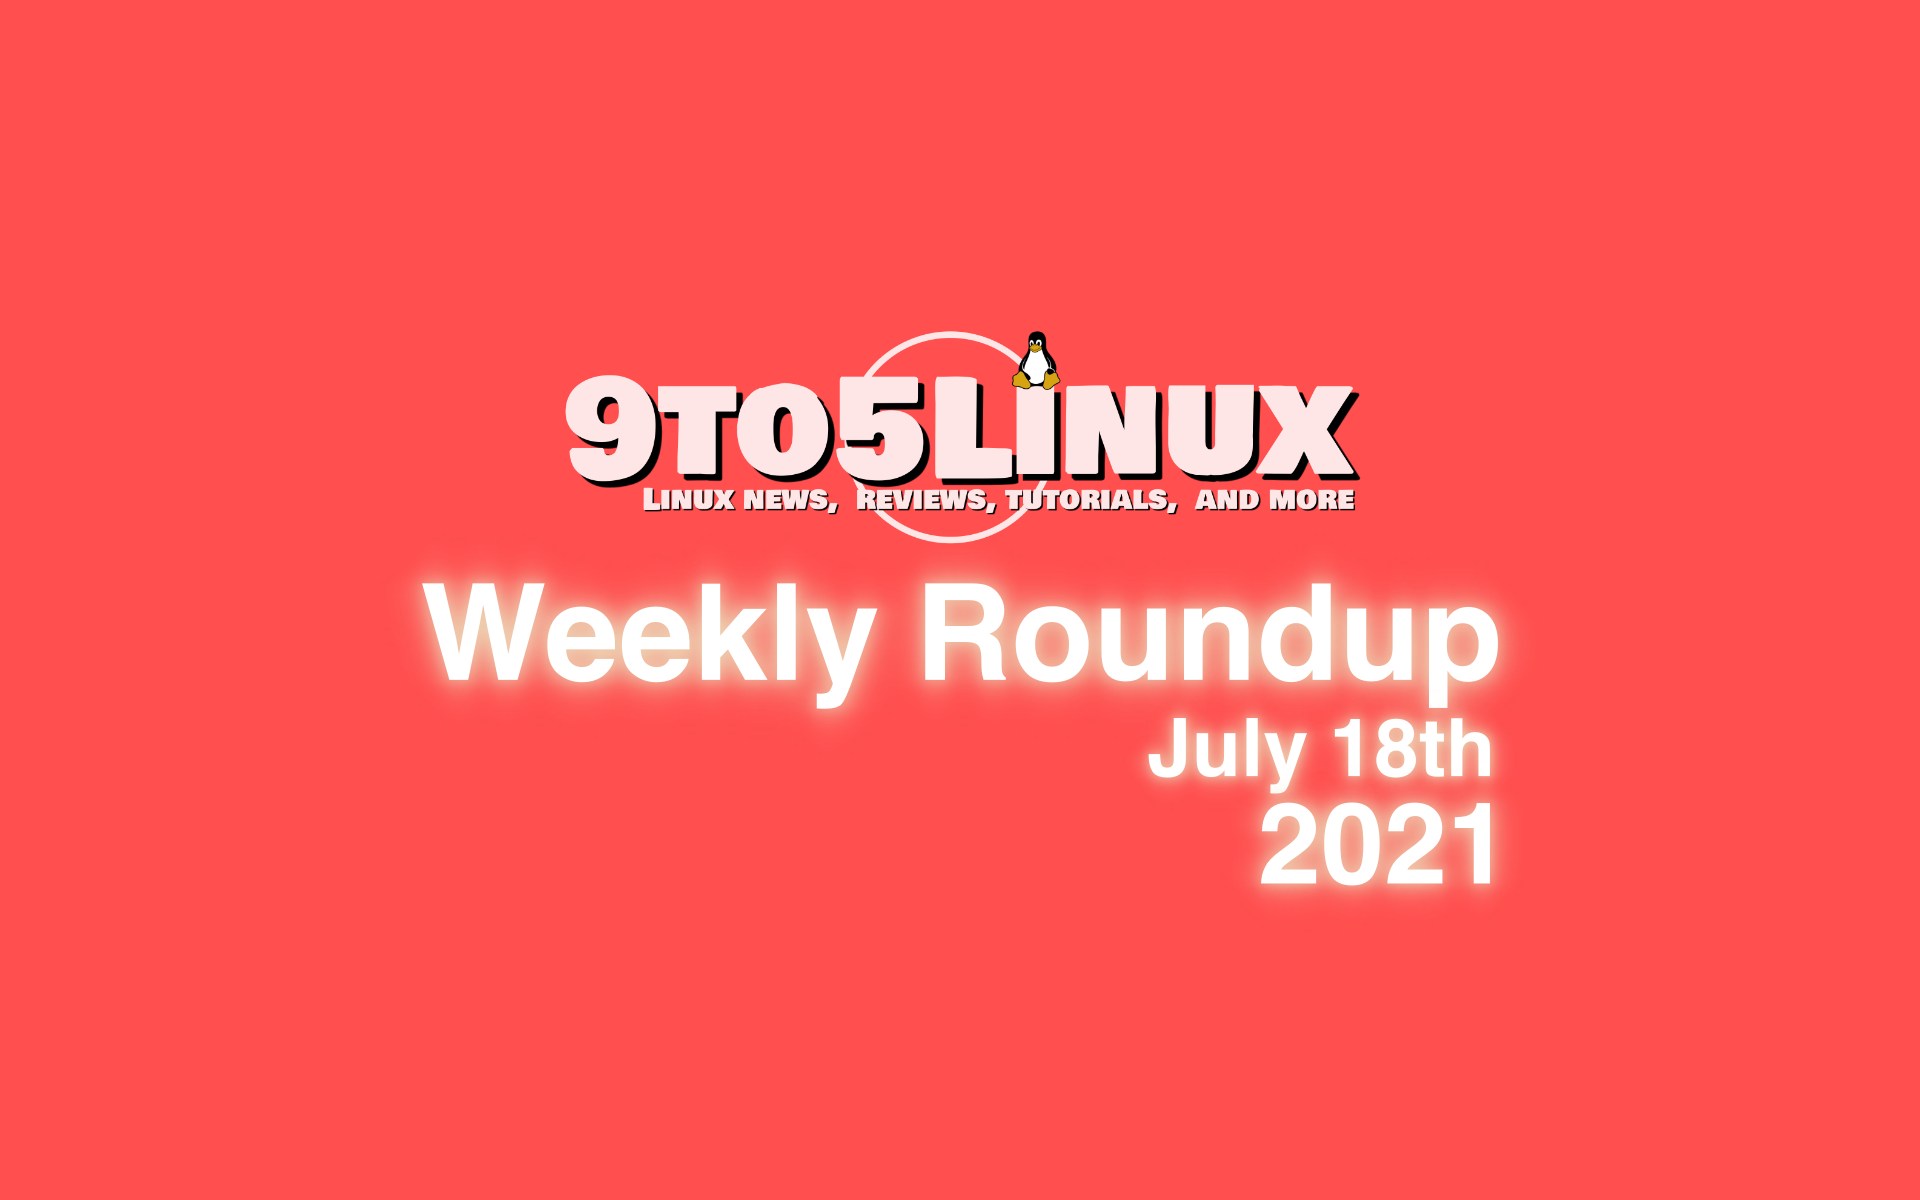 9to5Linux Weekly Roundup: July 18th, 2021